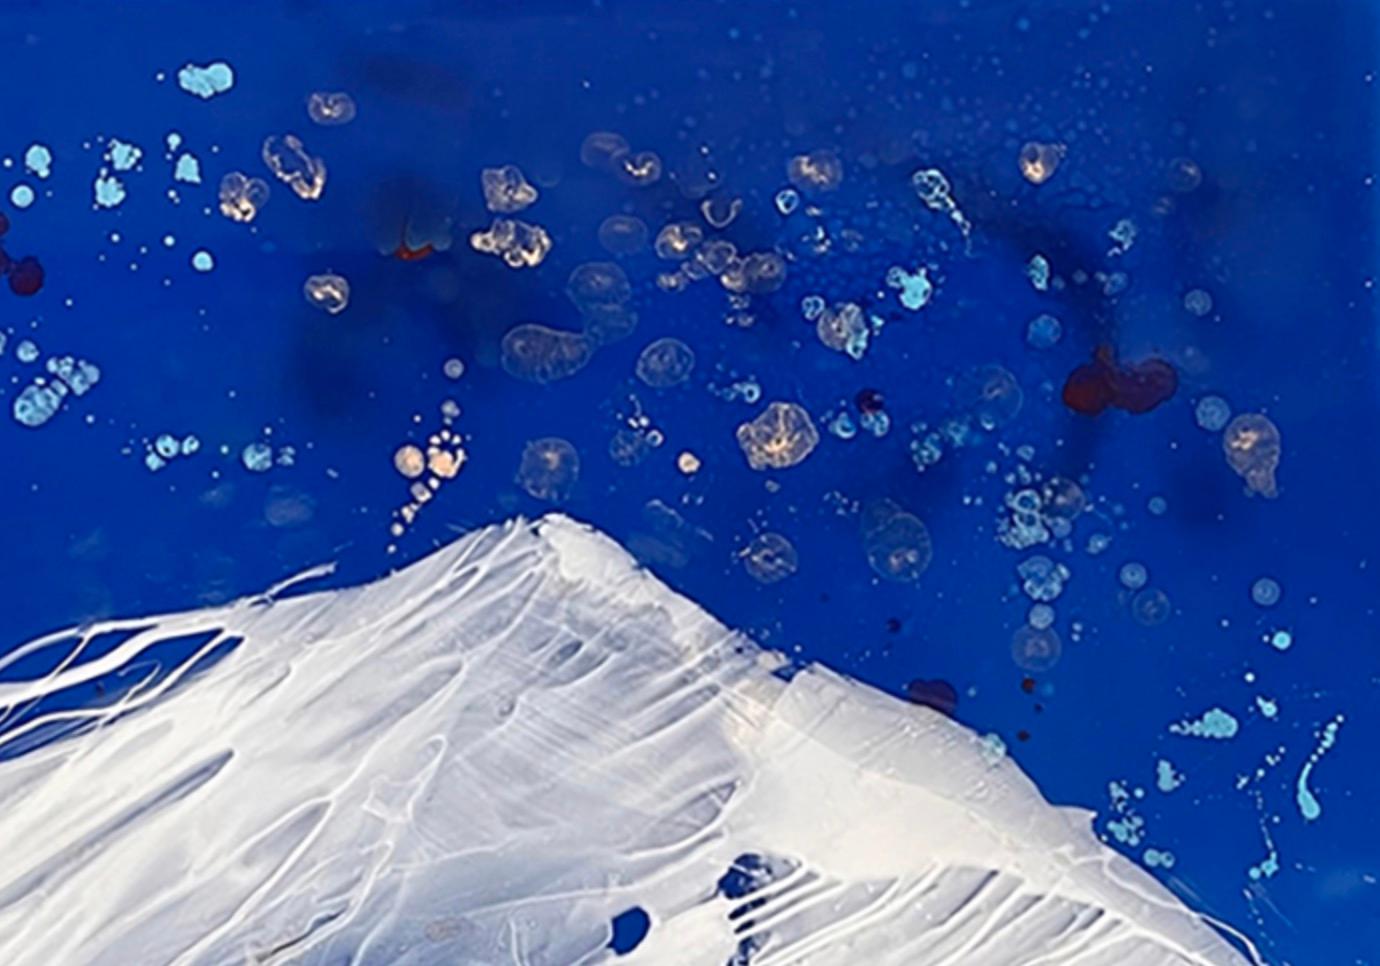 Spirit Mountain - Blue Abstract Painting by Sharon Weiner